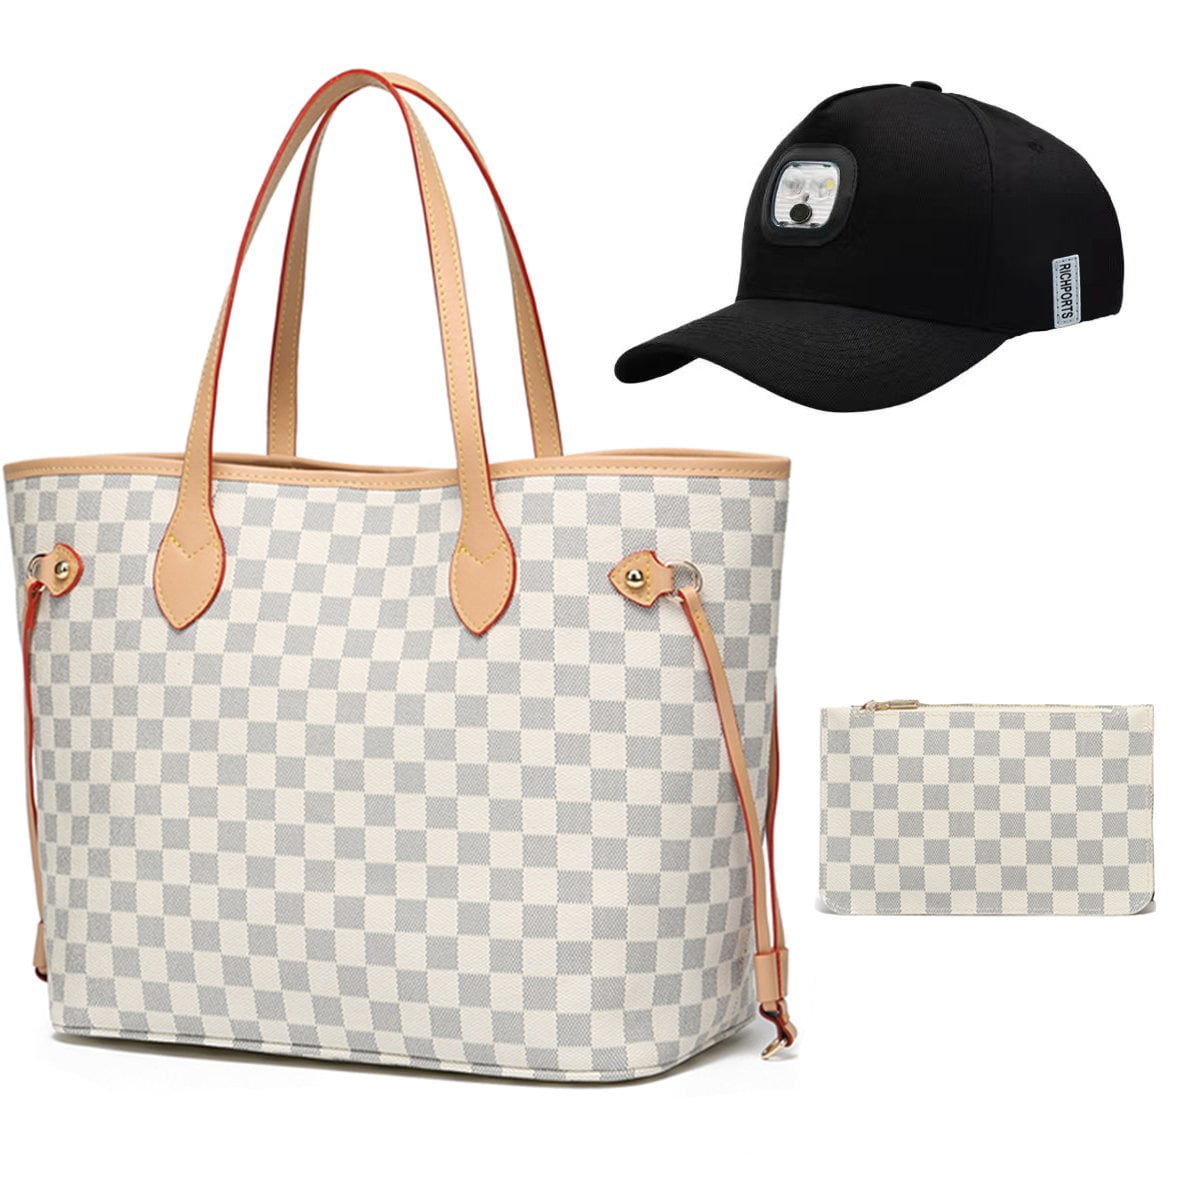 Louis Vuitton Neverfull Giveaway - The-Collectory: The smartest